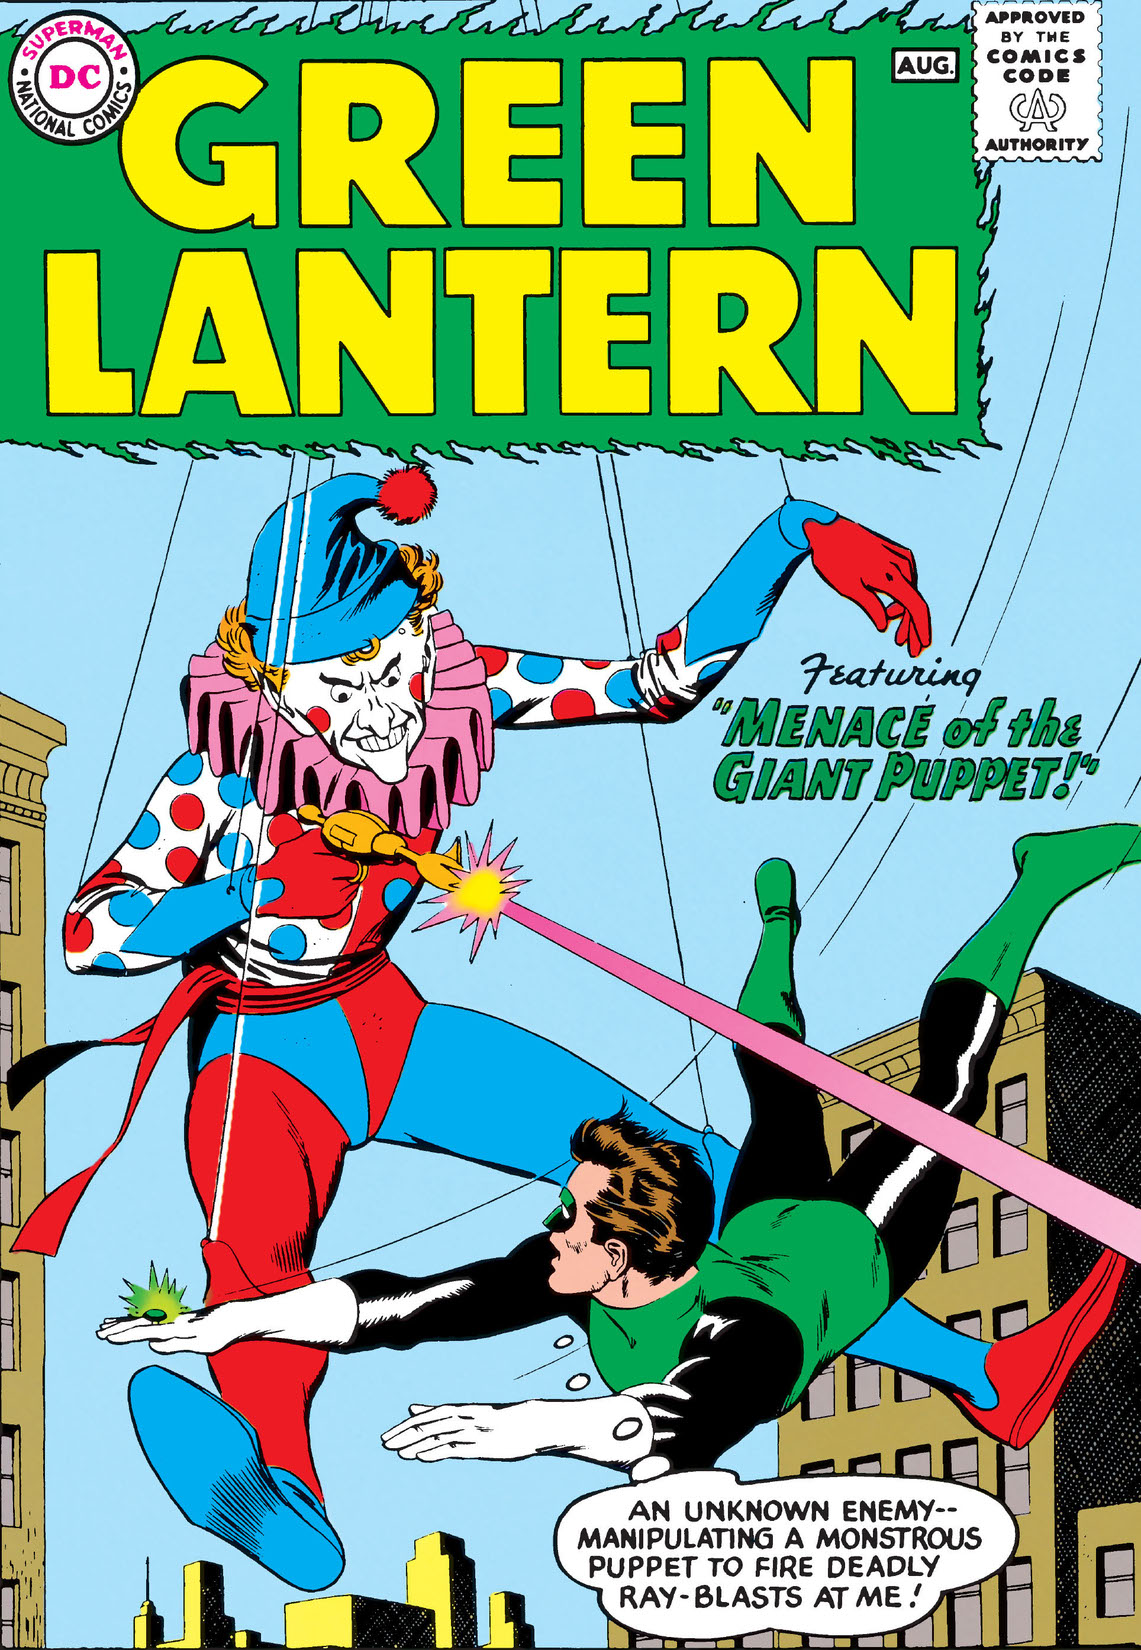 Green Lantern (1960-) #1 preview images